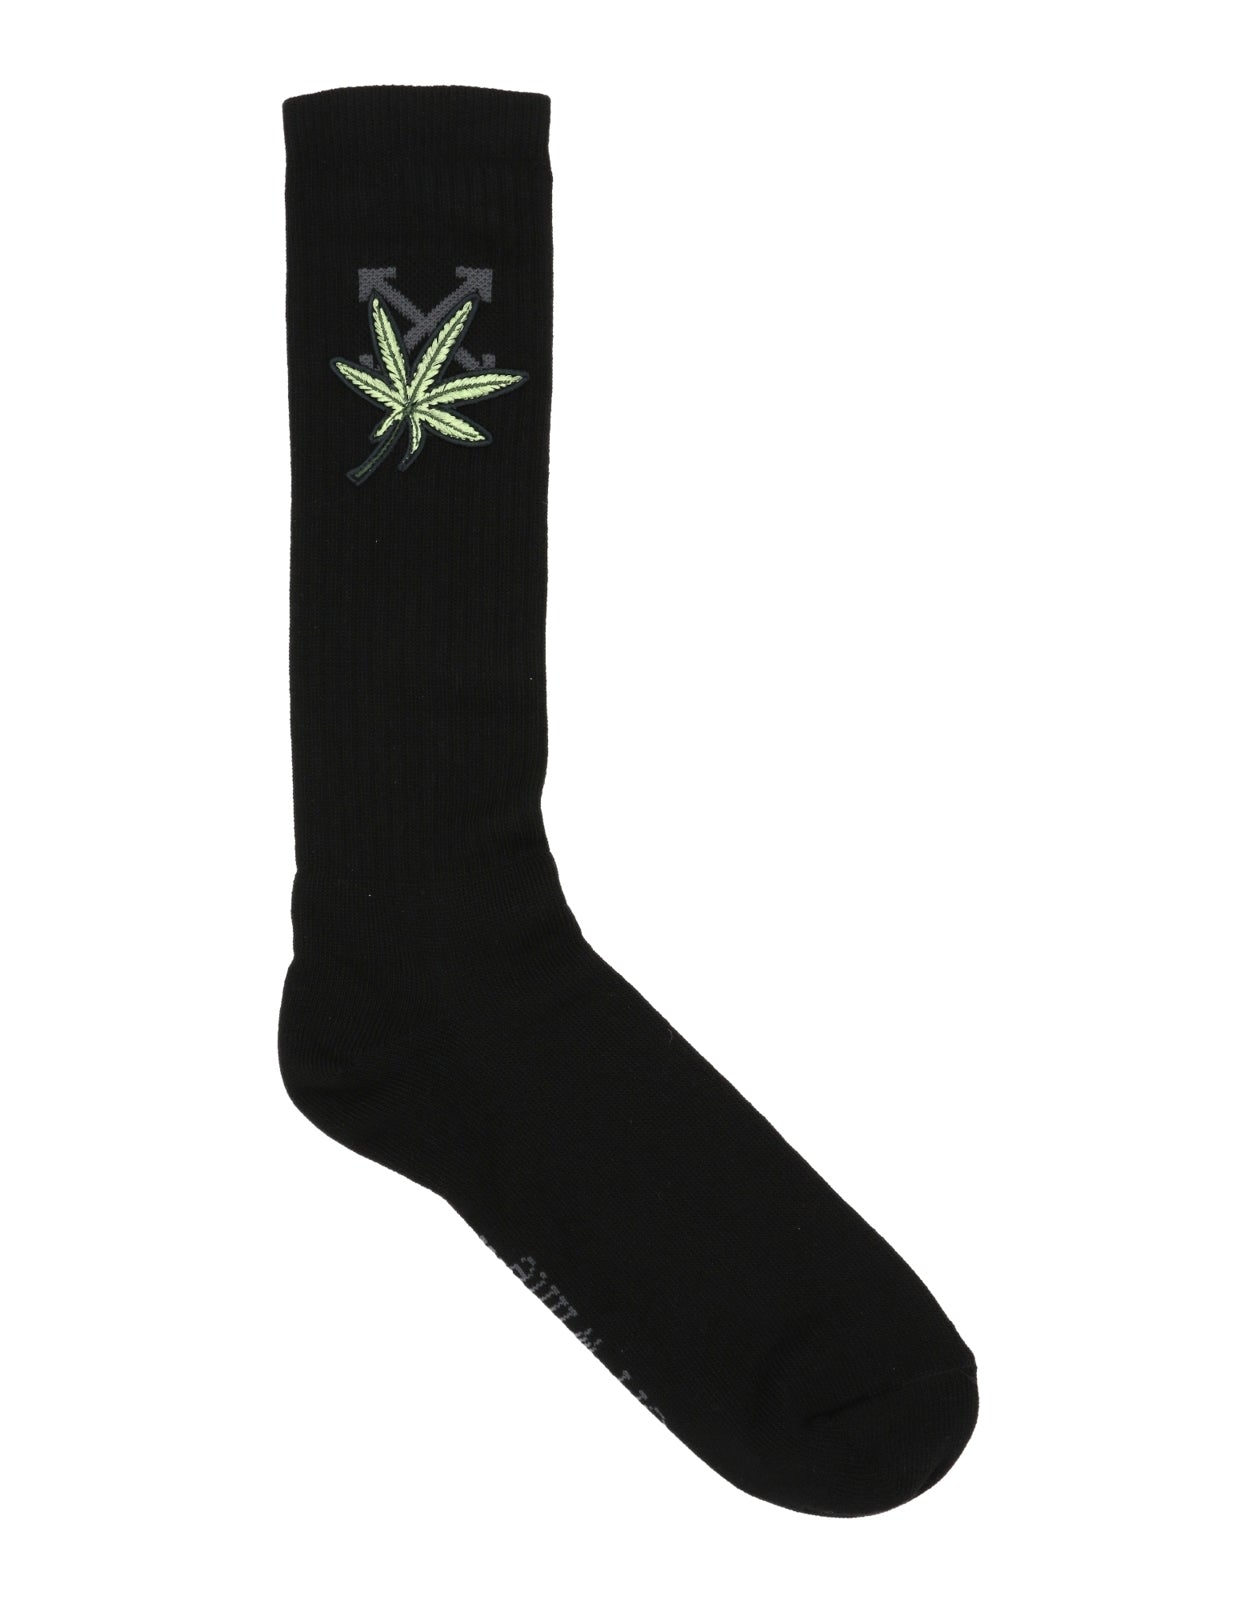 OFF-WHITE c/o VIRGIL ABLOH Weed Knee High Socks One Size Knitted Made in Italy gallery main photo